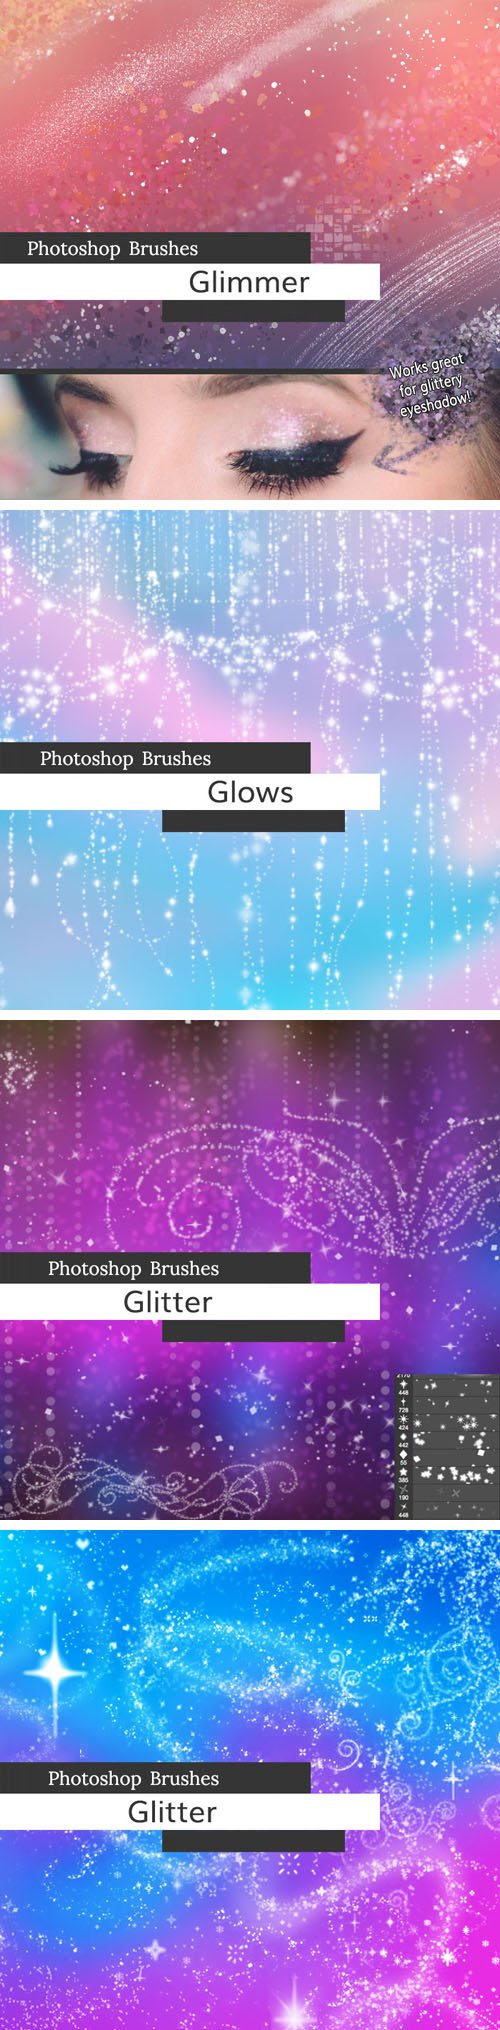 100+ Glimmer & Glitter Brushes Pack for Photoshop & Photoshop Elements